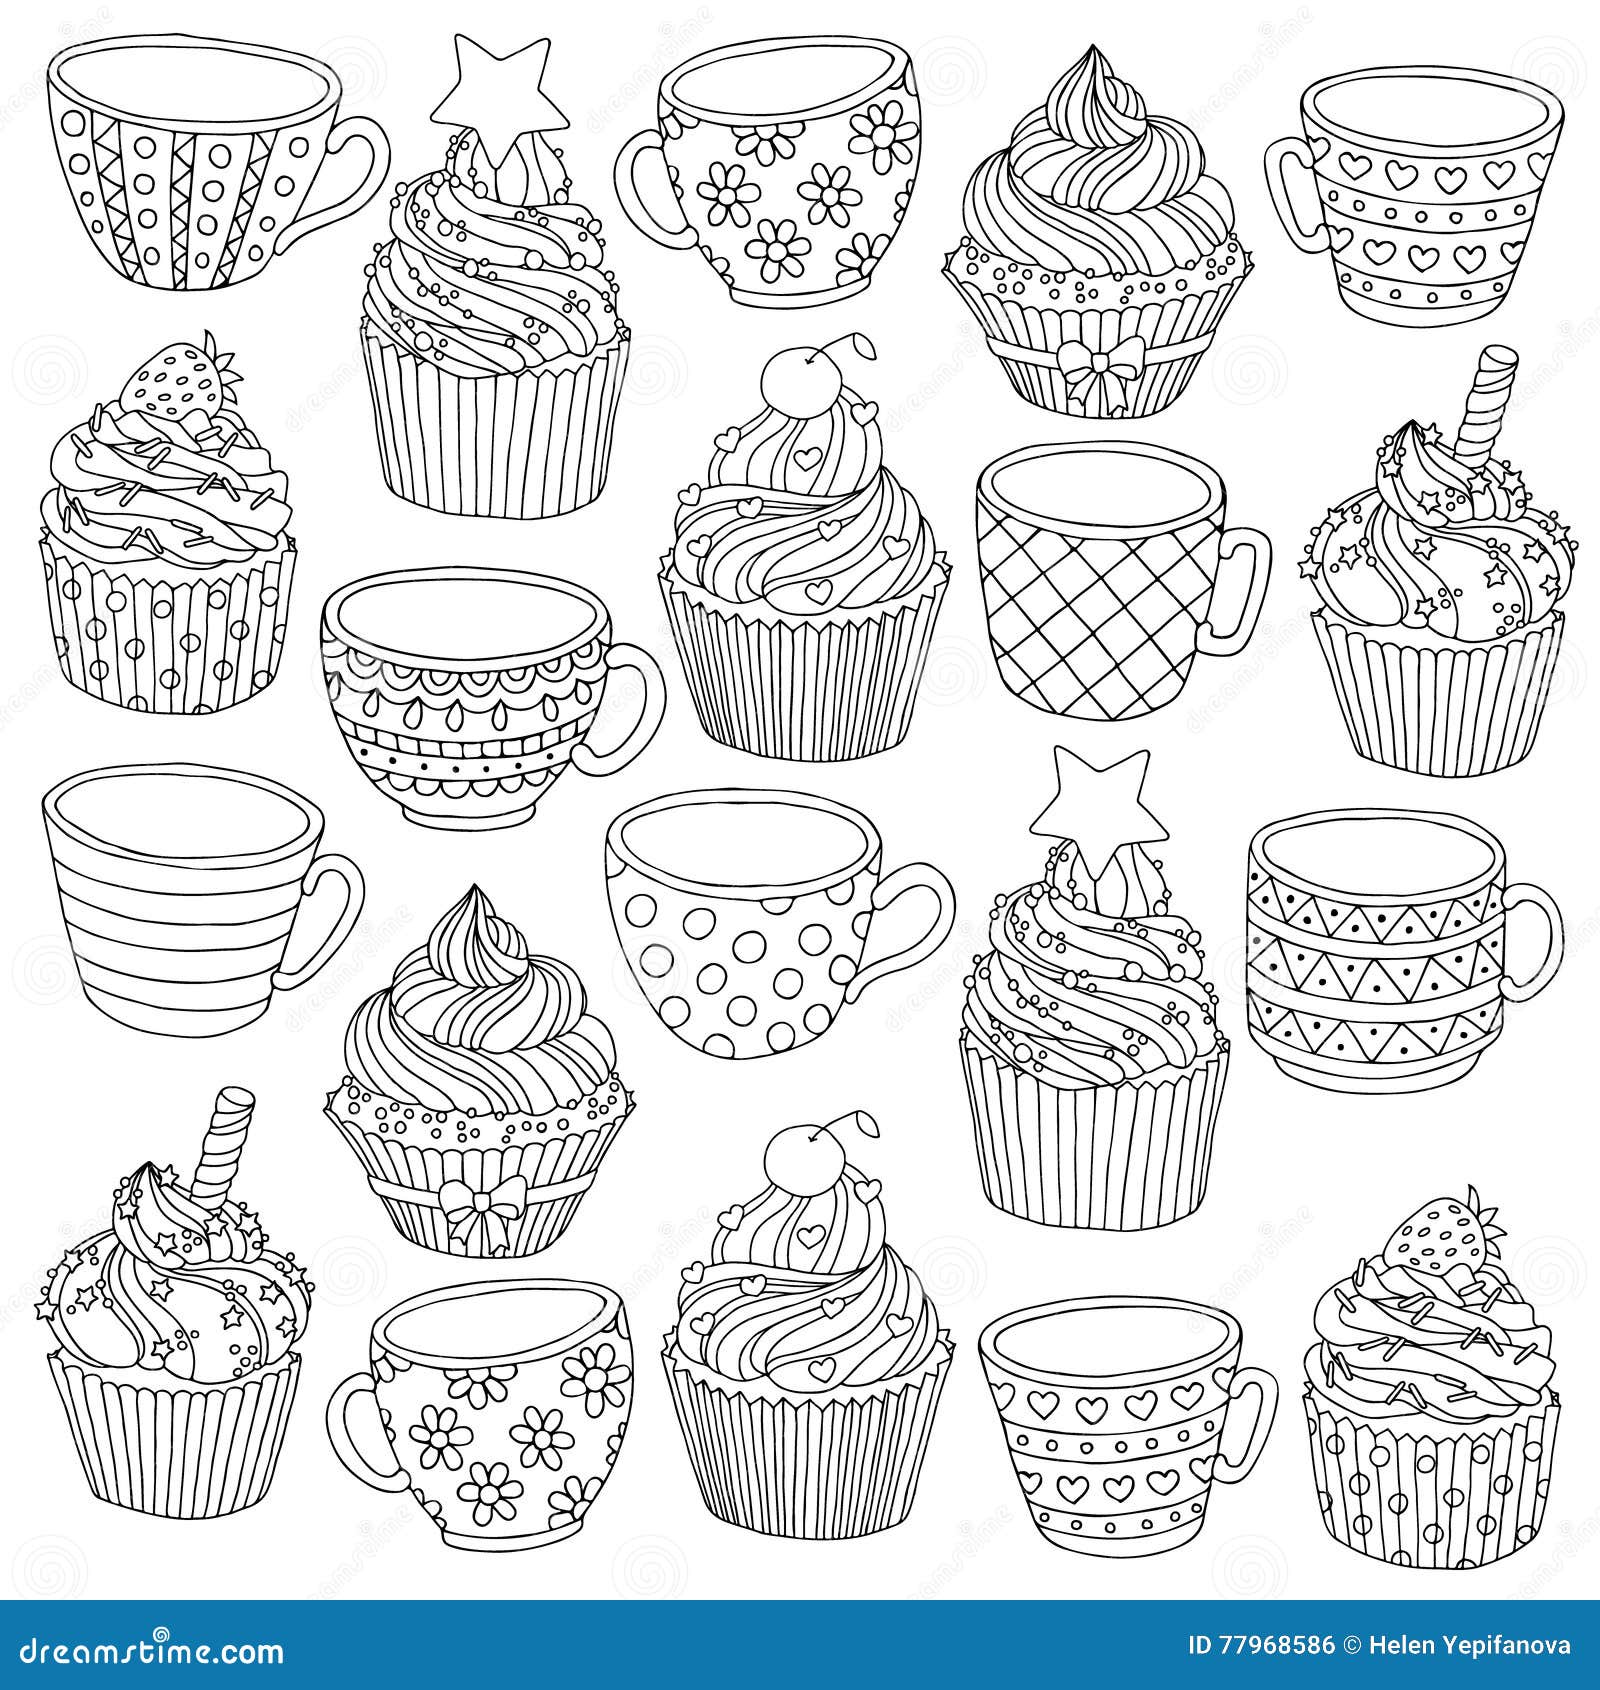 Download Vector Hand Drawn Cup Cupcake Illustration For Adult Coloring Book Freehand Sketch For Adult